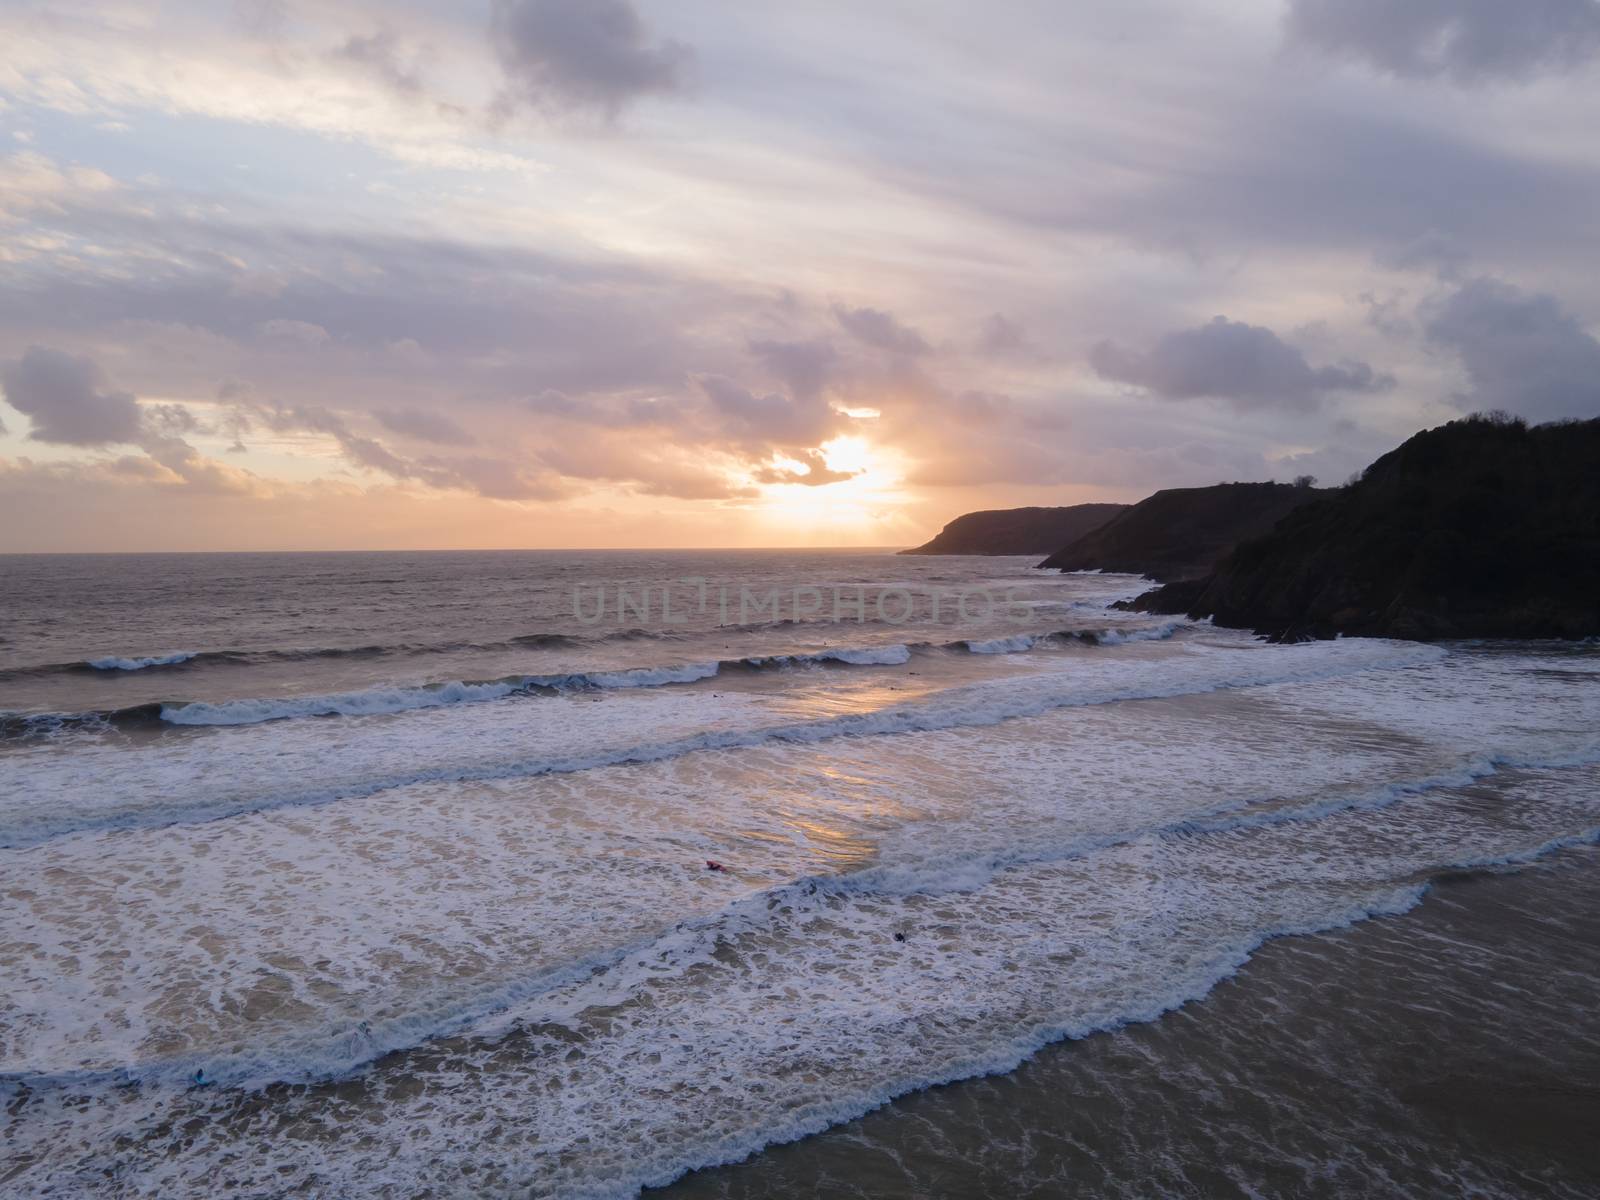 A Stunning Coastal Sunset Full Of Colour Overlooking the Sea At Caswell Bay in Gower, Wales UK by WCLUK